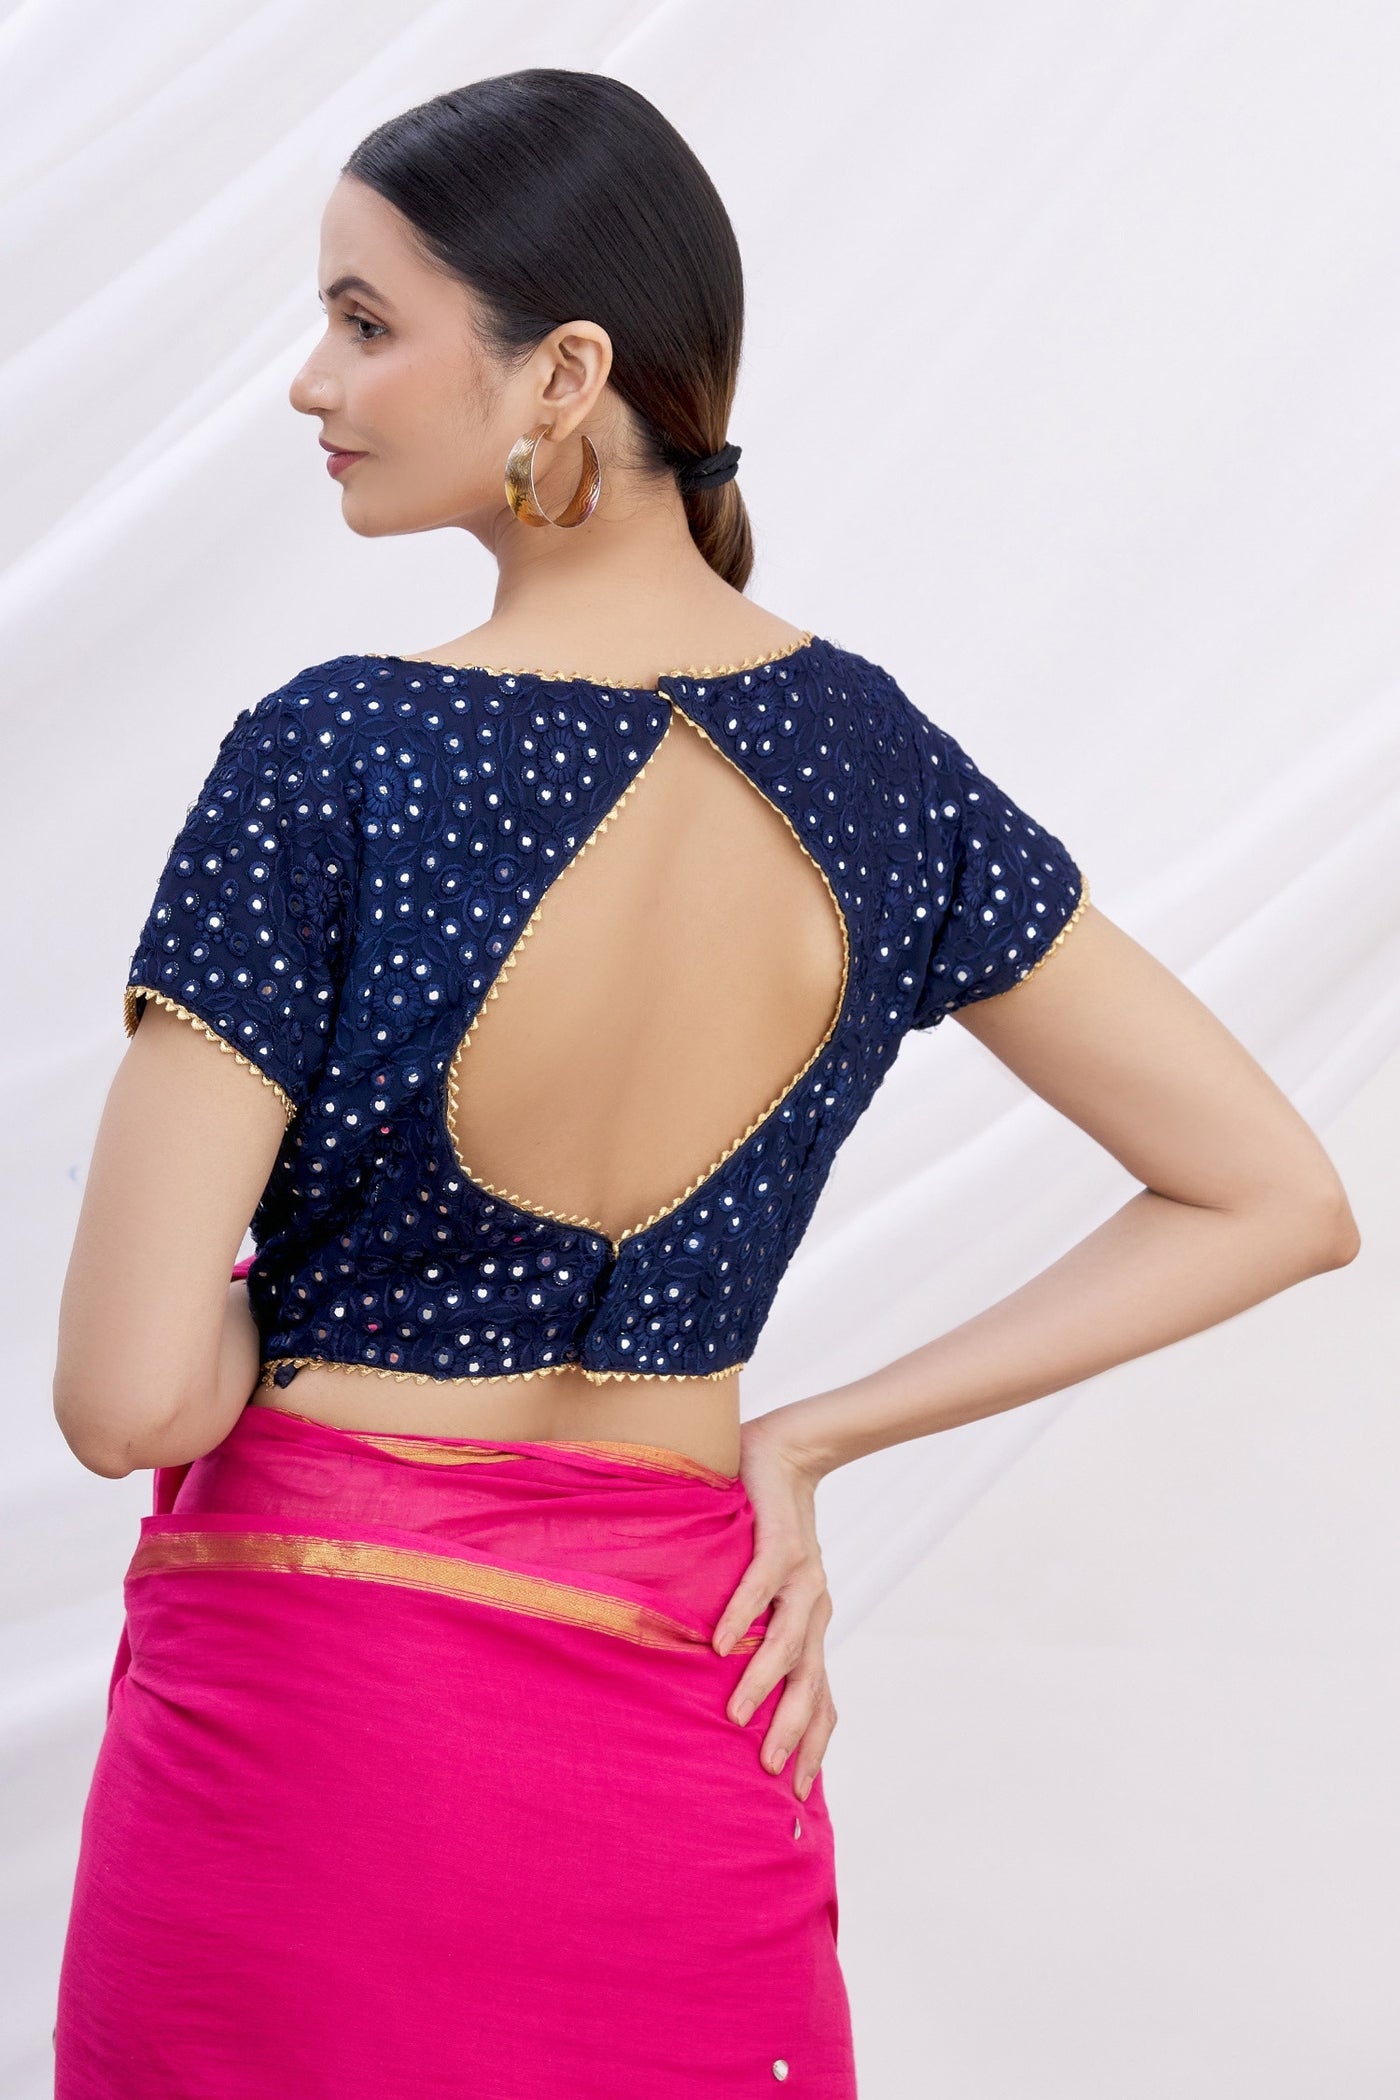 Blue Mirror Work Blouse - Indian Clothing in Denver, CO, Aurora, CO, Boulder, CO, Fort Collins, CO, Colorado Springs, CO, Parker, CO, Highlands Ranch, CO, Cherry Creek, CO, Centennial, CO, and Longmont, CO. Nationwide shipping USA - India Fashion X